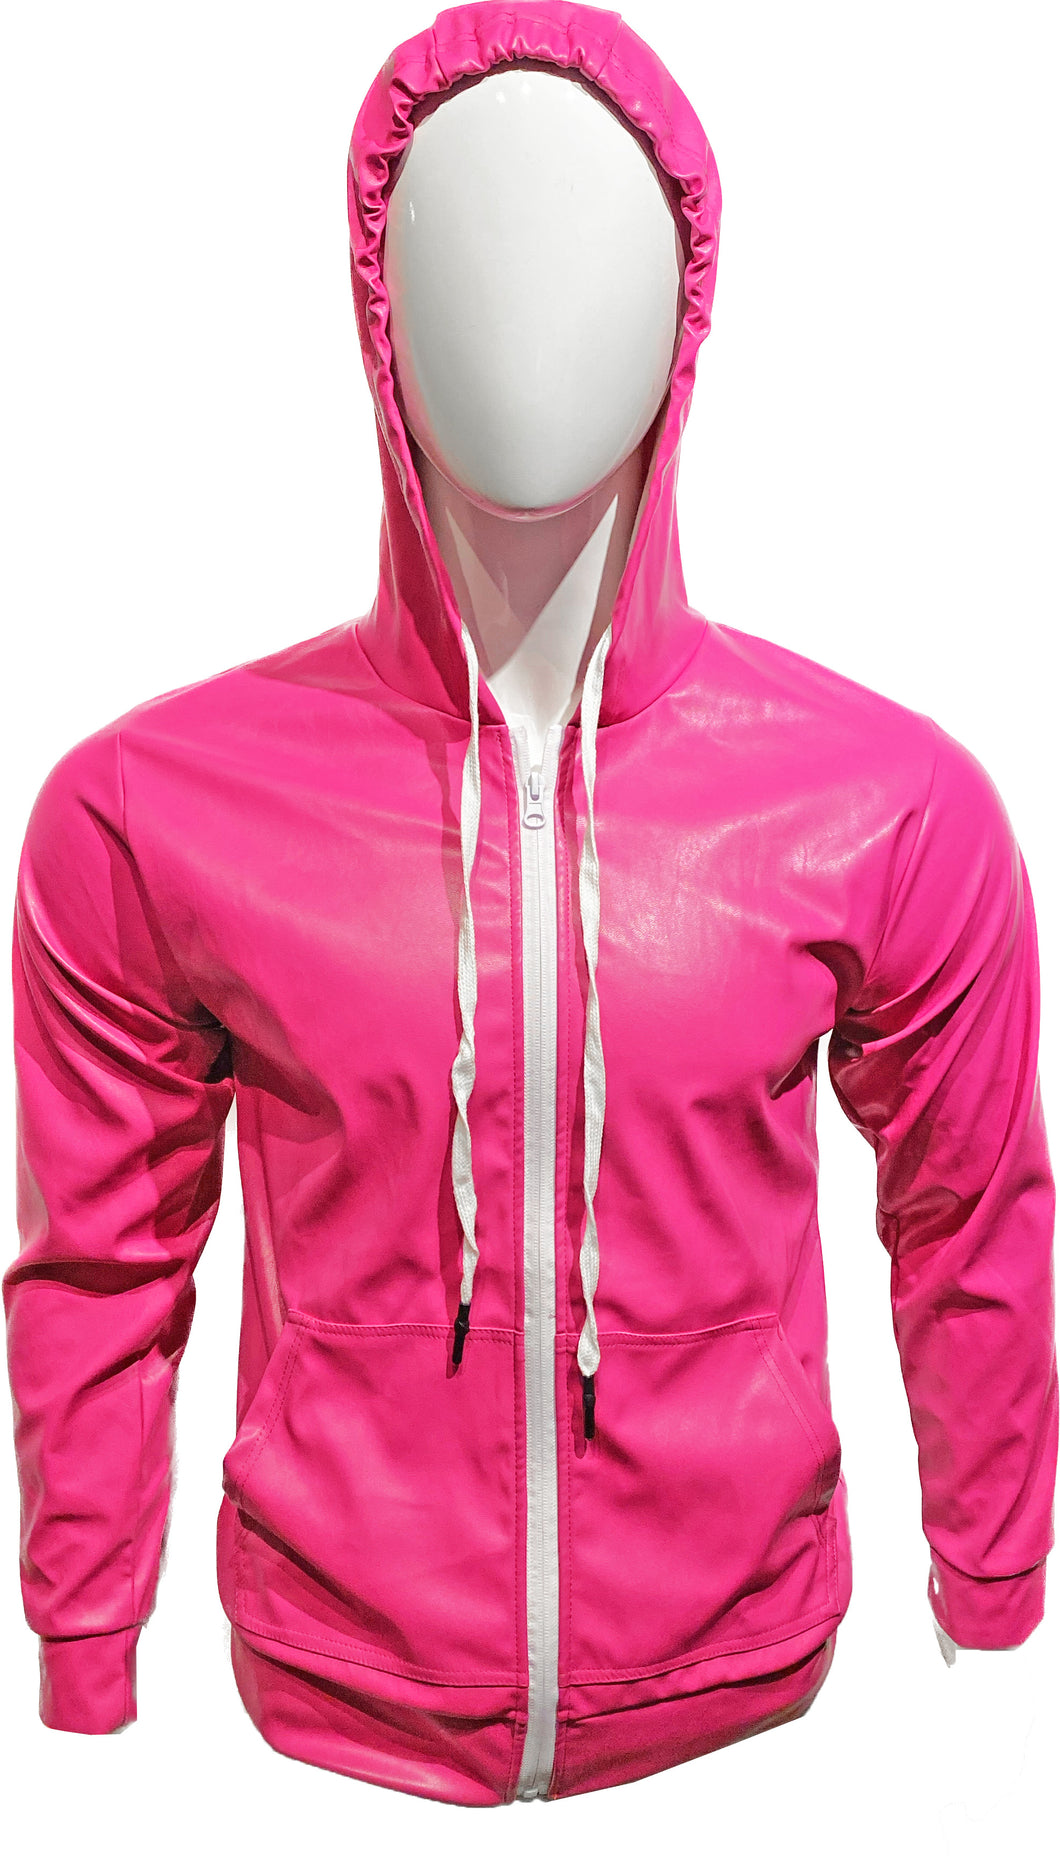 Metallic Faux Leather Hoodie - Hot Pink